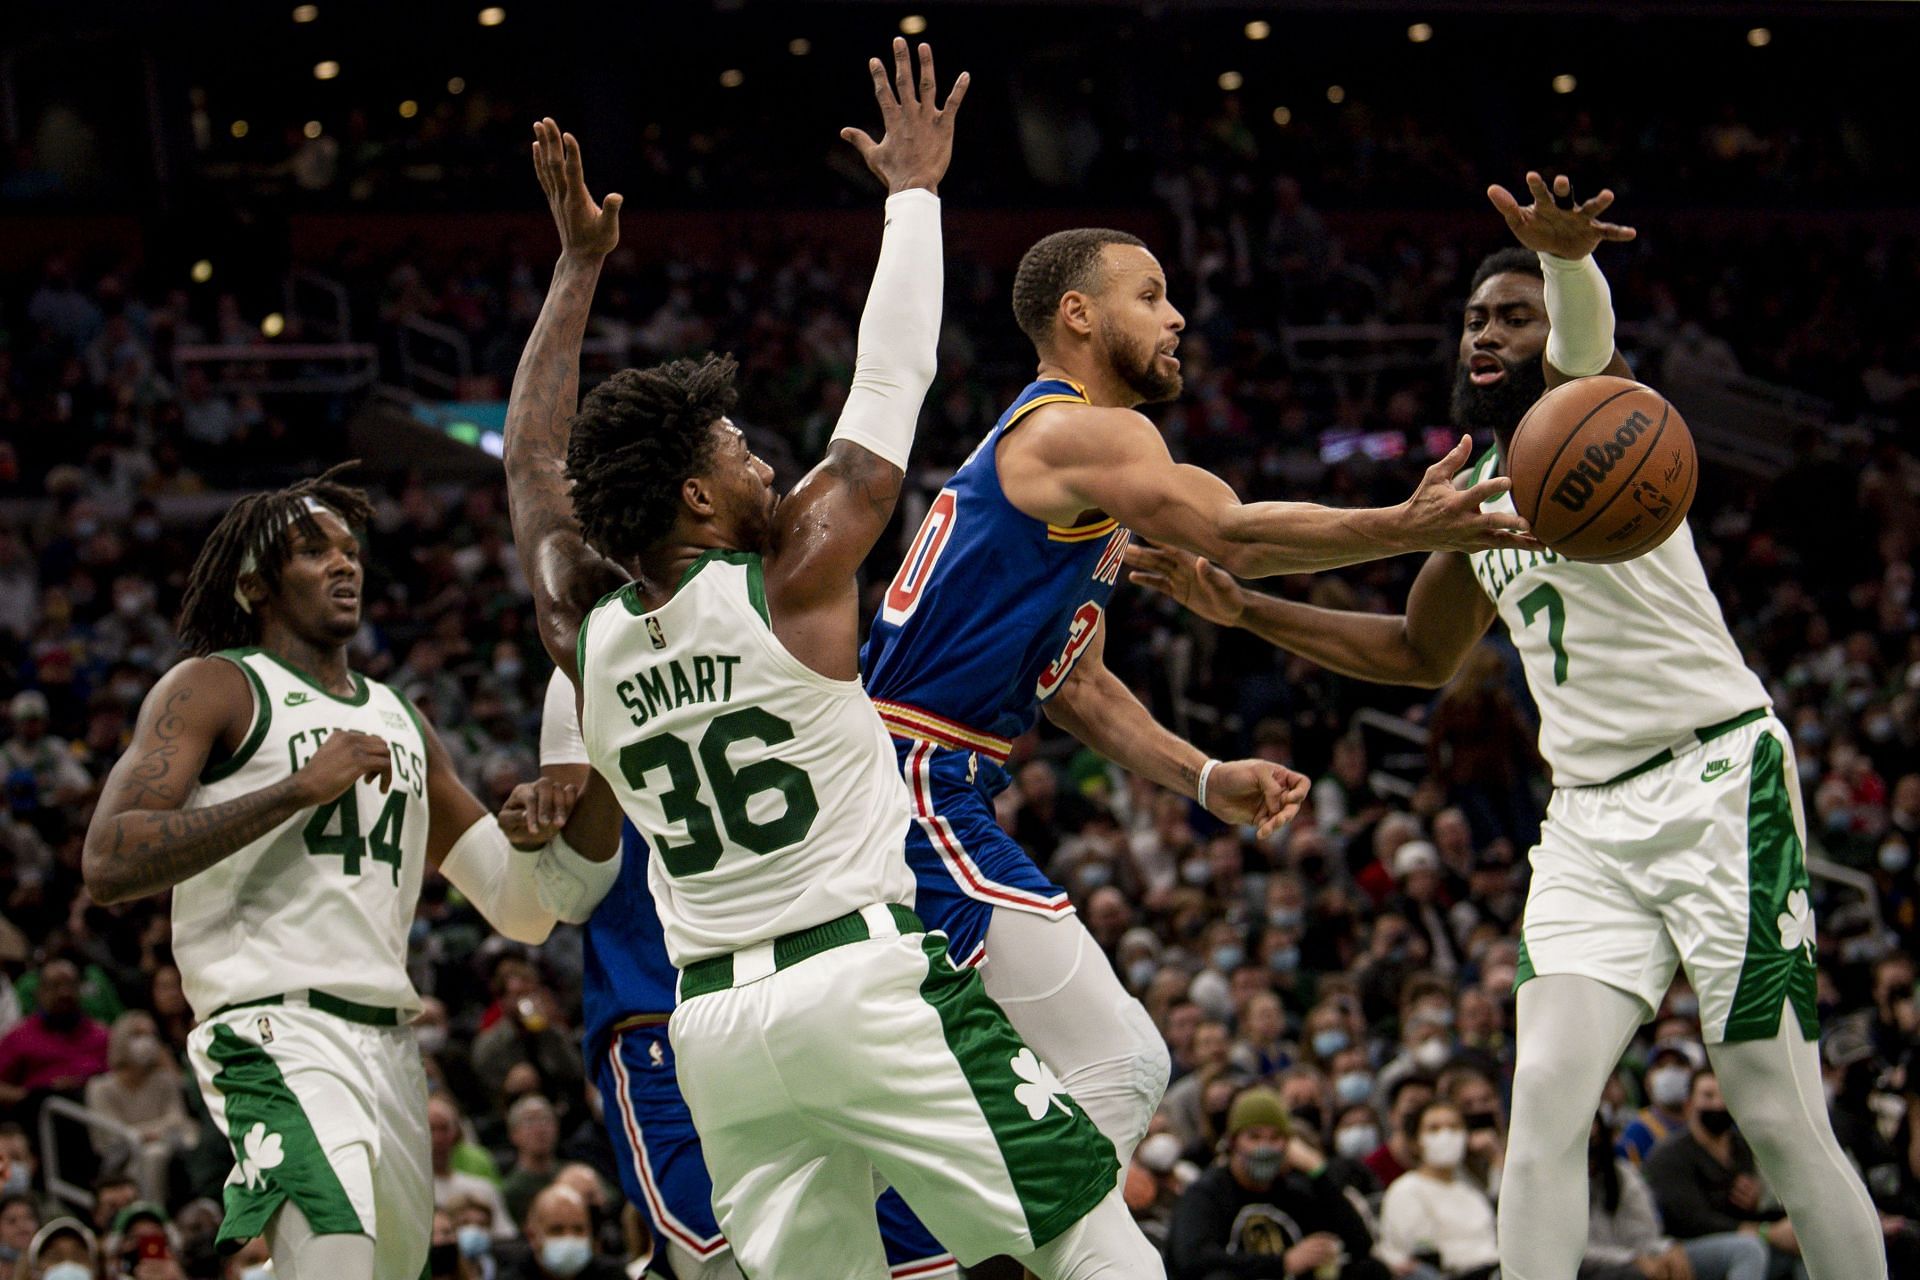 Marcus Smart versus Steph Curry is a formidable match-up, but what remains to be seen is his on-court agility to run around and chase Steph.